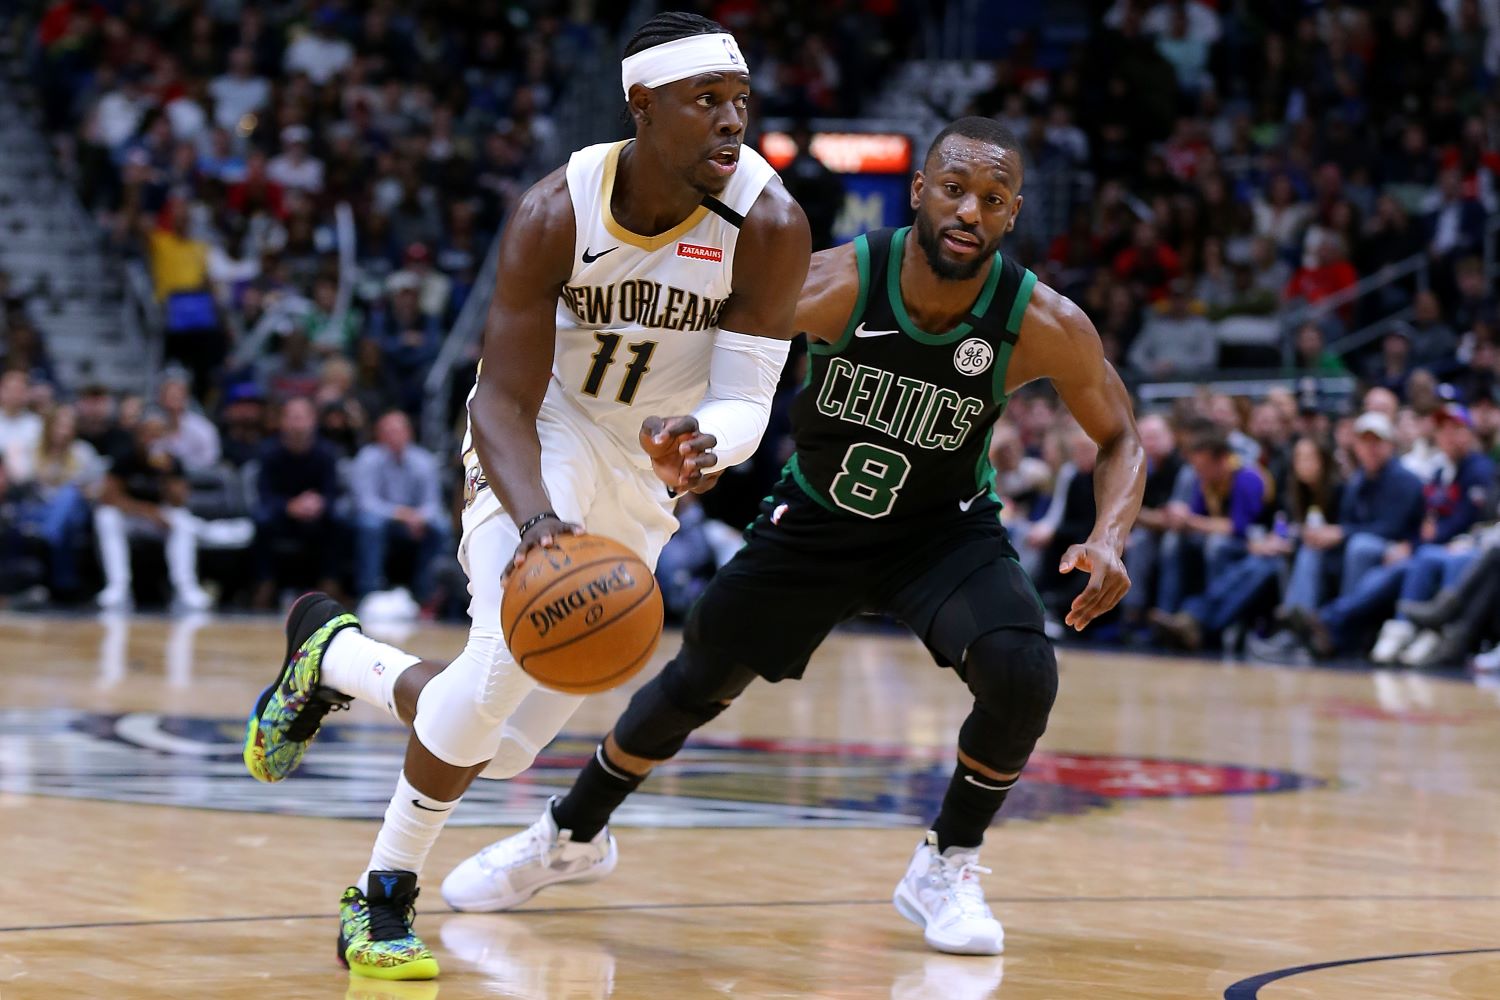 The Boston Celtics have their sights set on acquiring Jrue Holiday. Will Danny Ainge pull off a trade for the All-Star point guard?